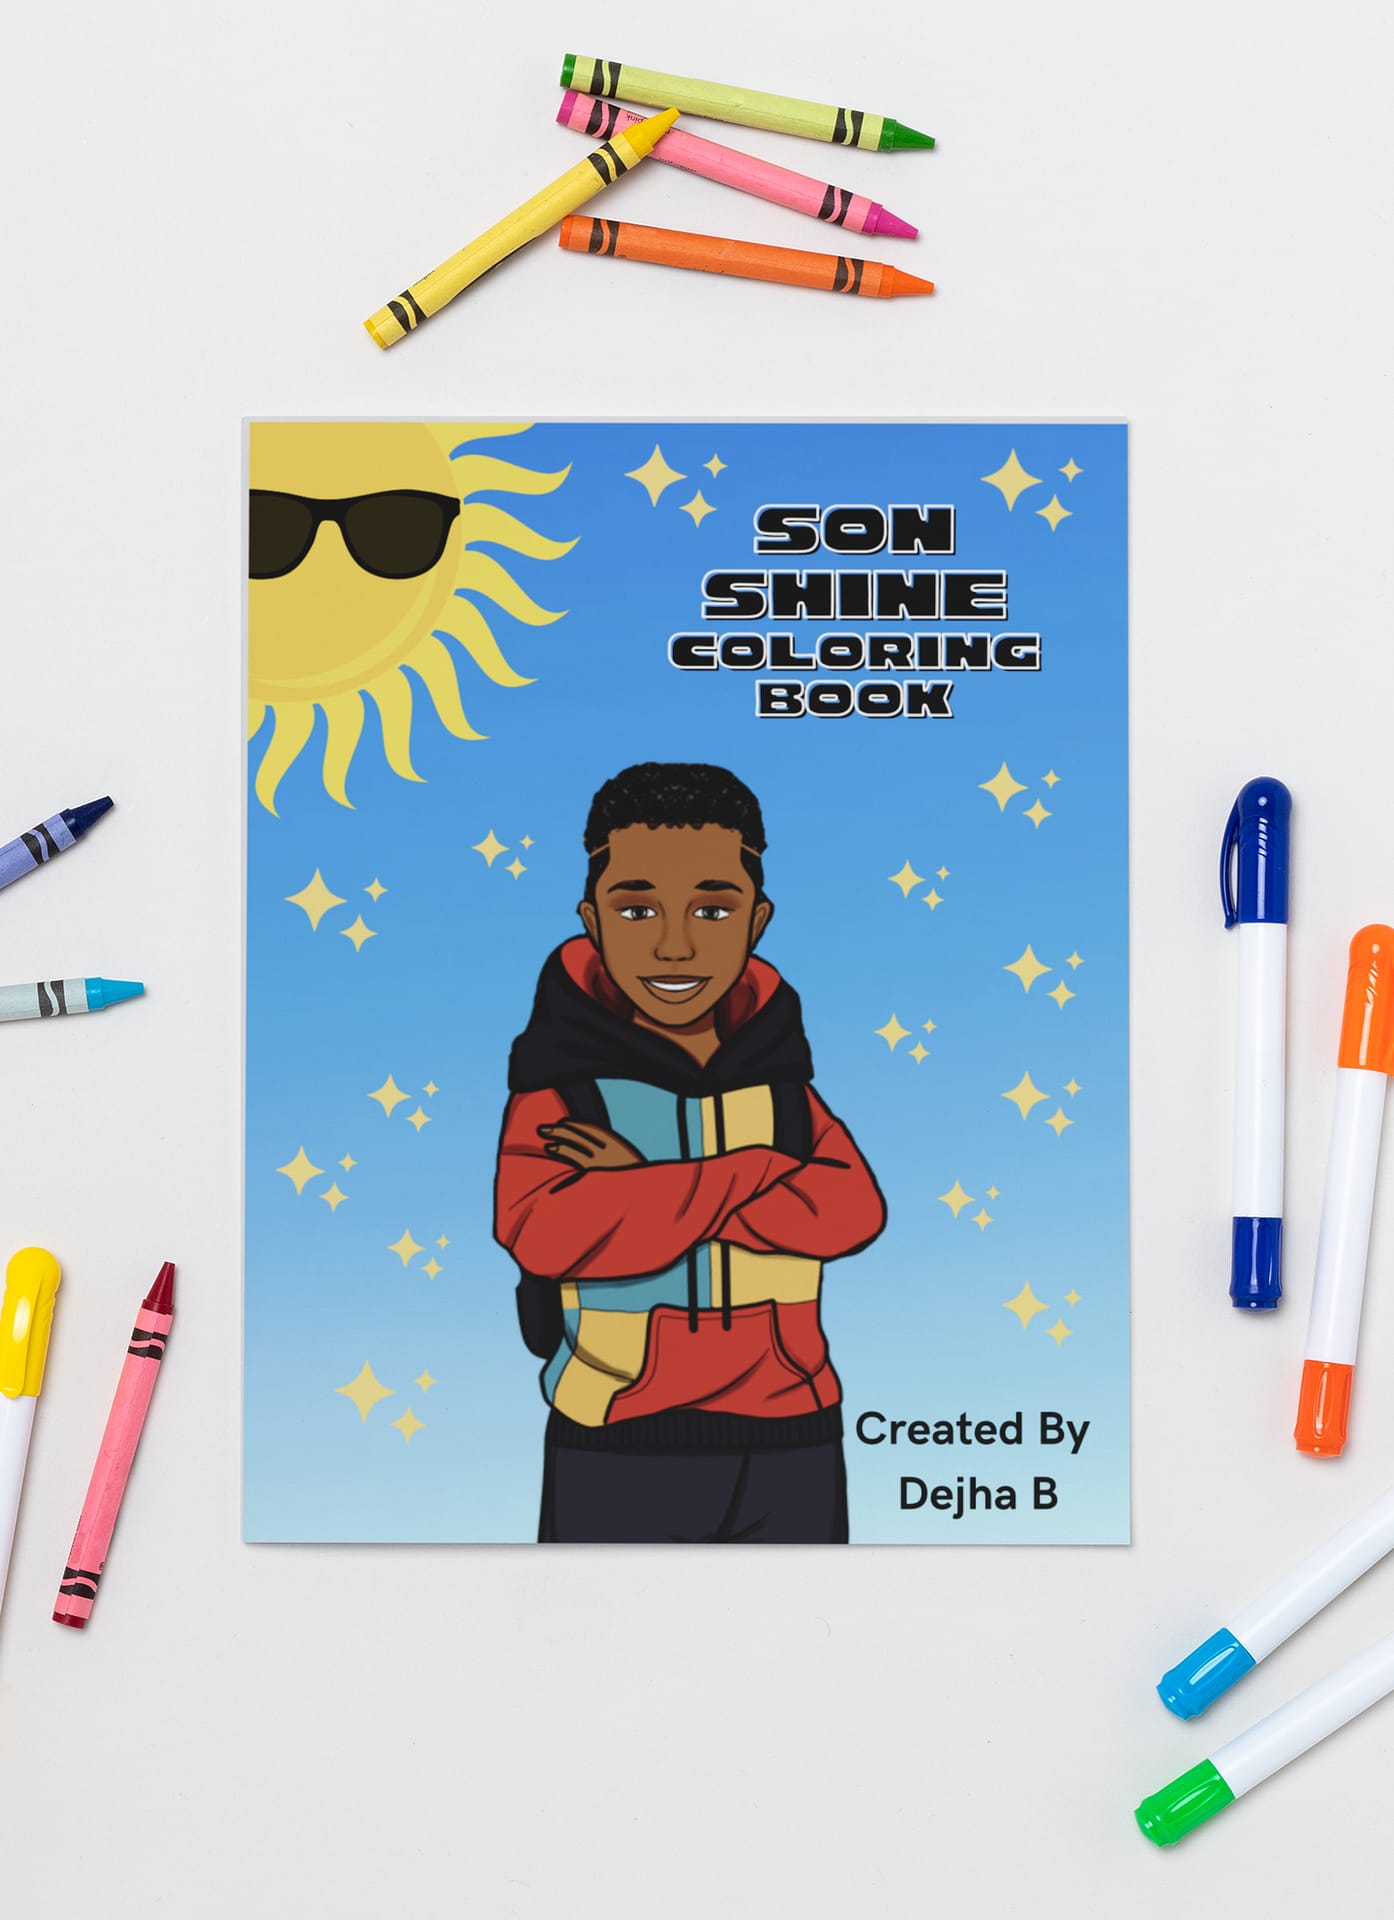 New SonShine Coloring Book for Boys - Dejha B Coloring